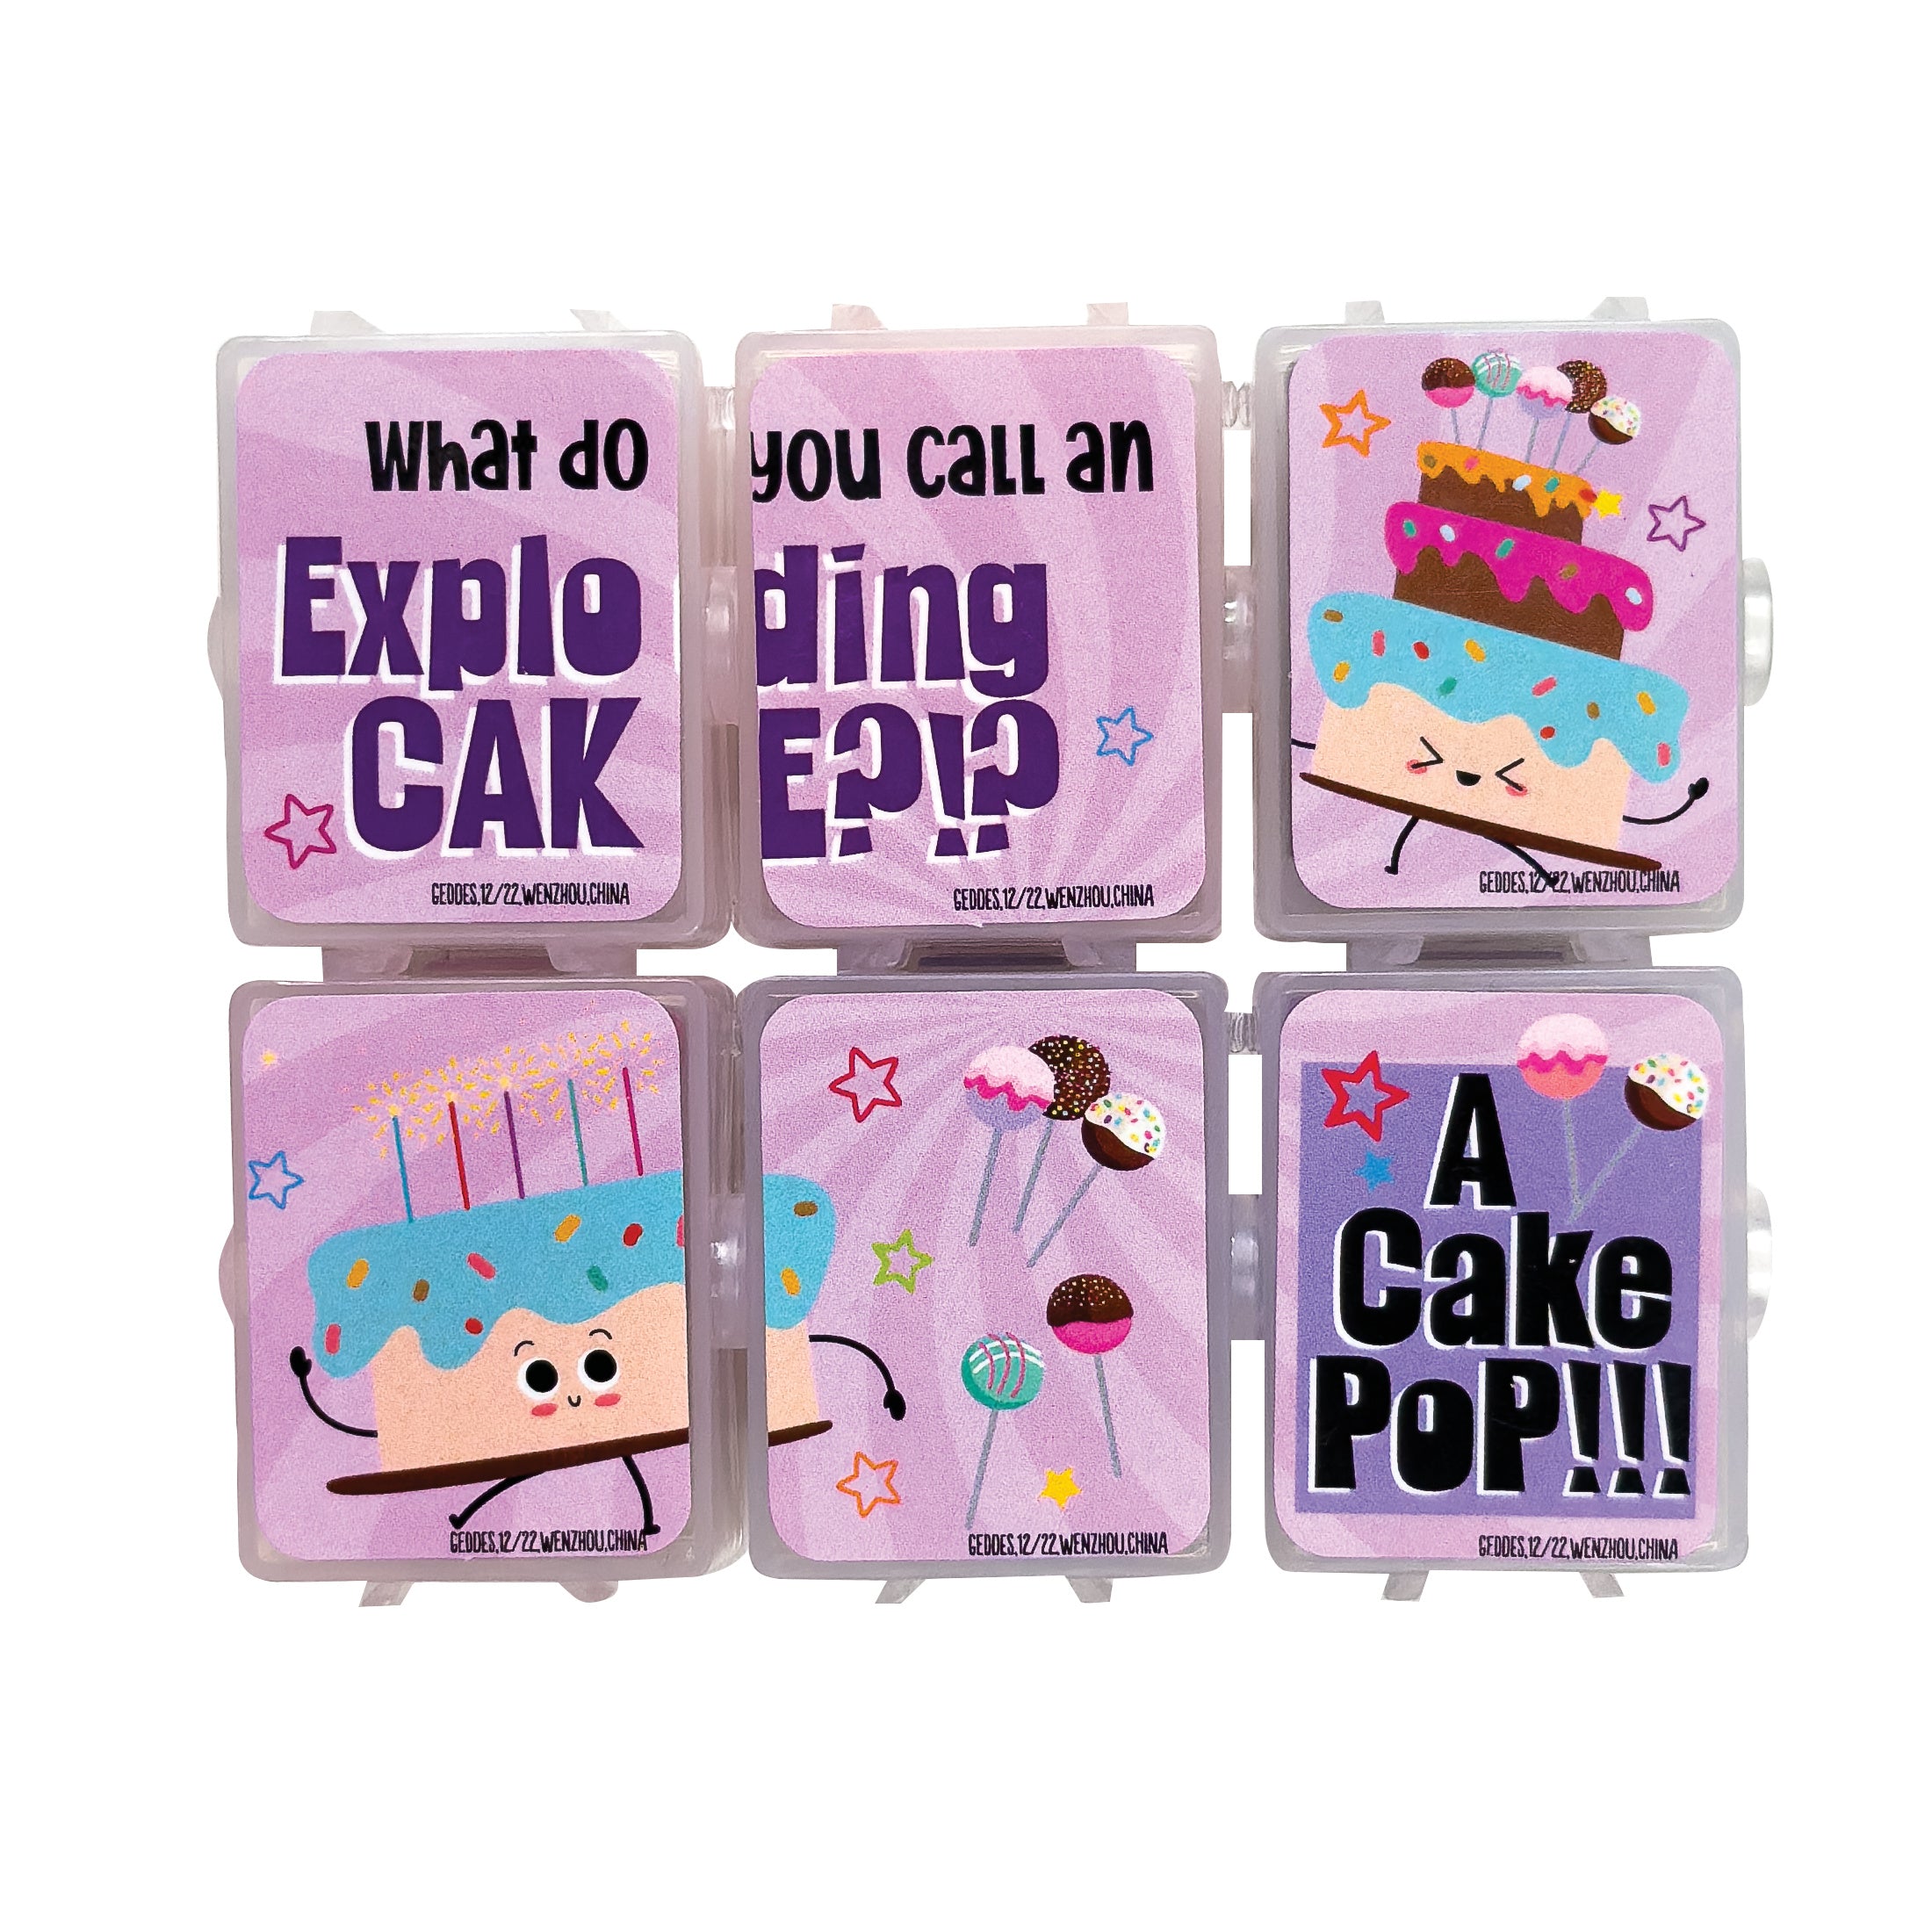 Link Up Scented Kneaded Erasers: Series One